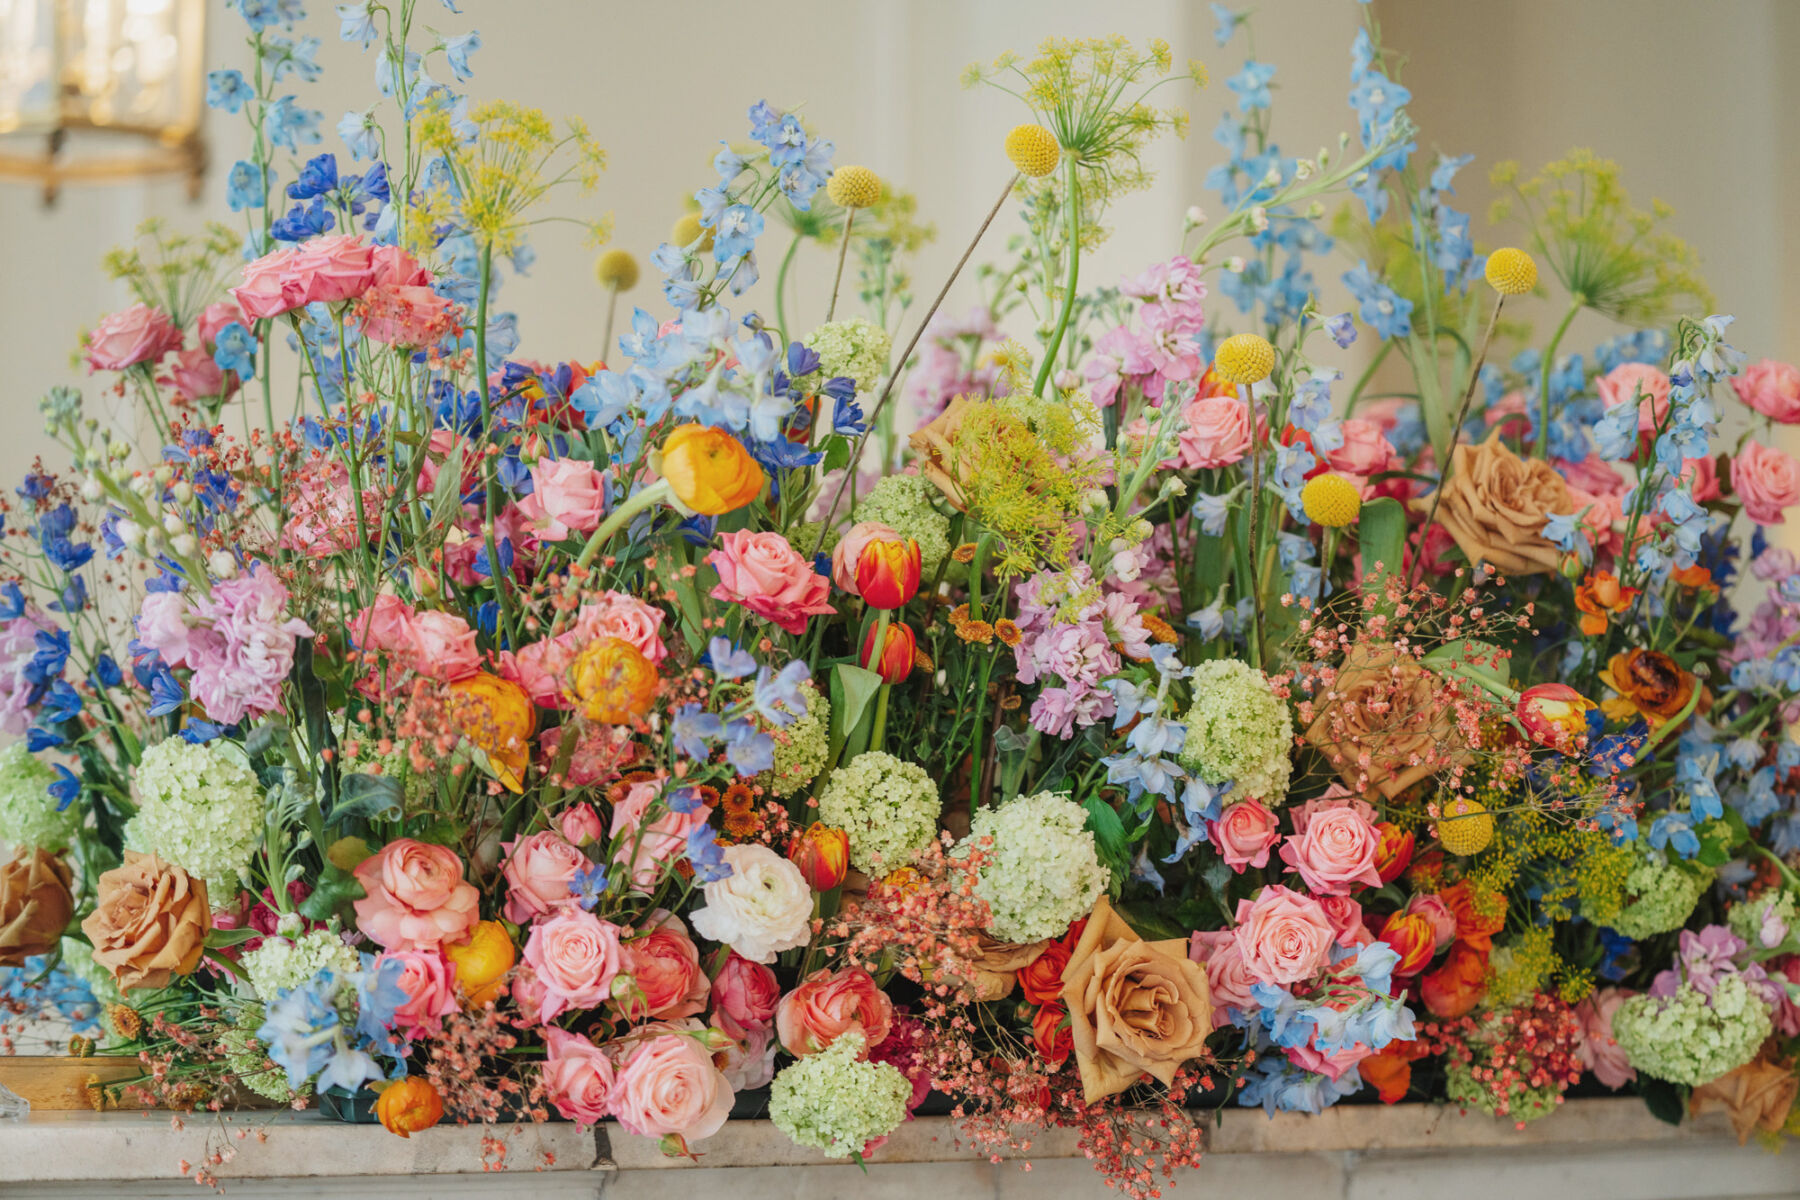 Bright and colourful sustainable wedding flowers